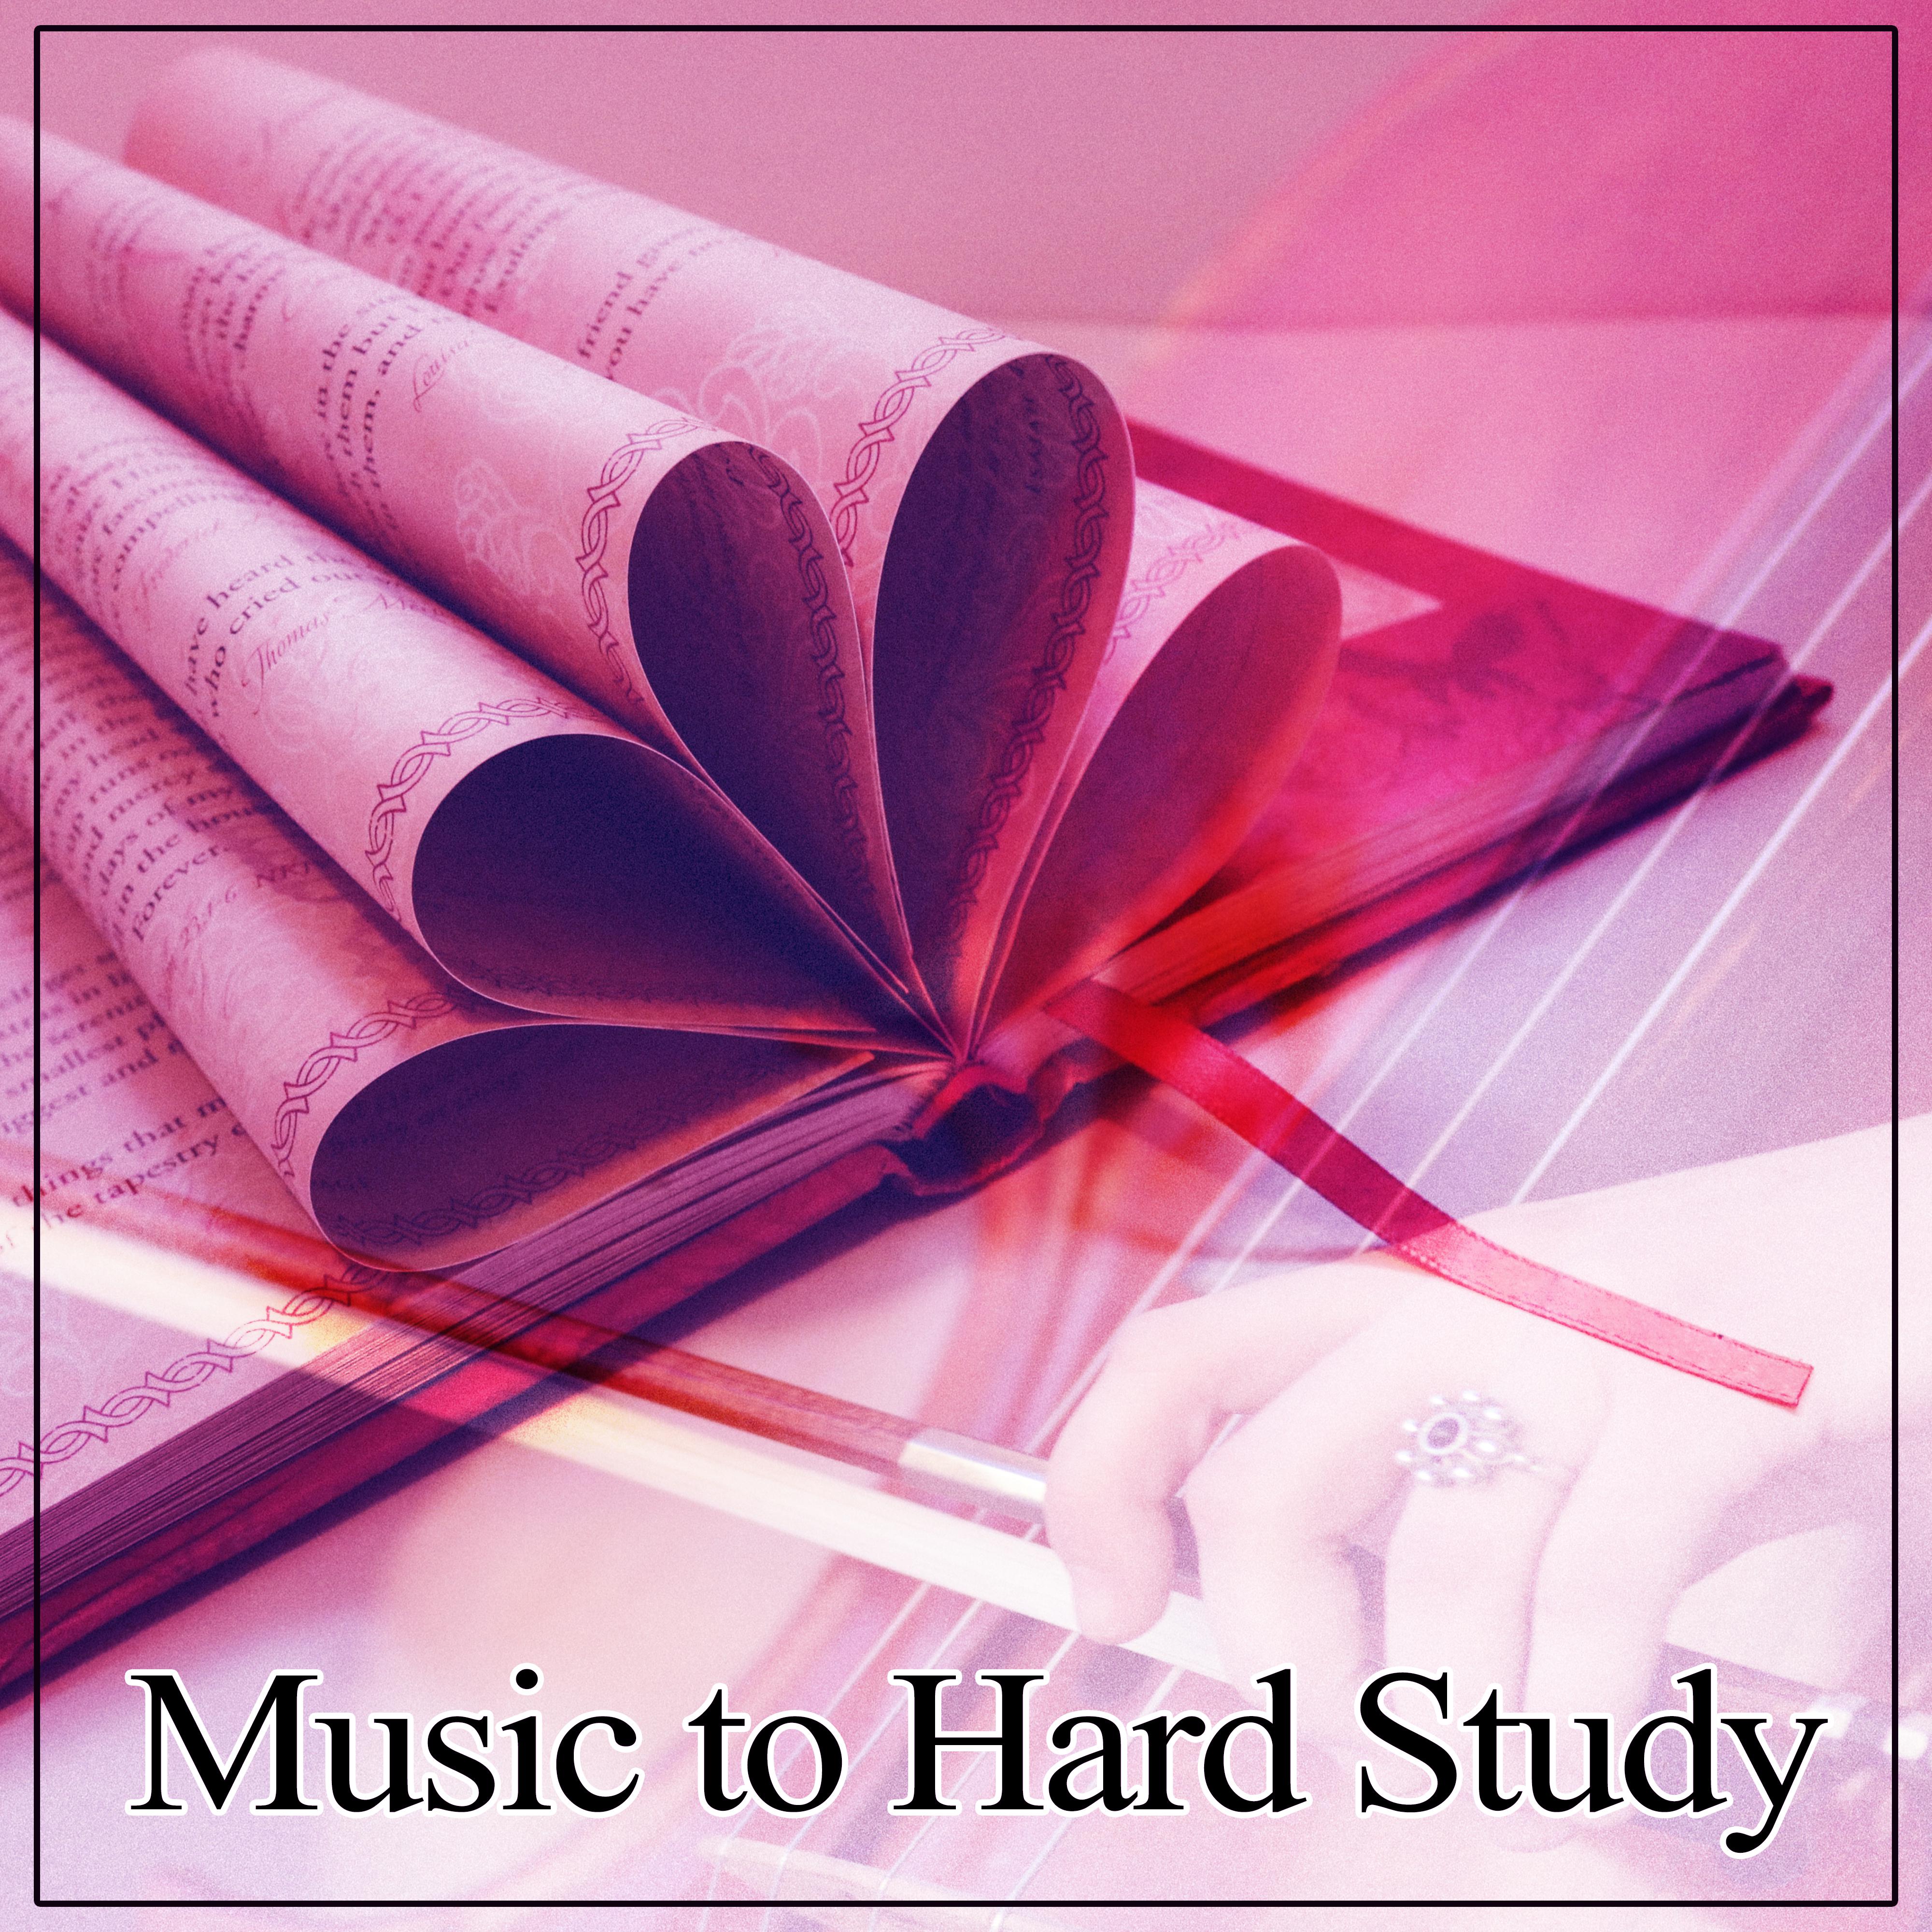 Music to Hard Study  Classical Sounds to Study, Clear Mind, Easy Exam, Successive Study, Mozart, Bach, Beethoven